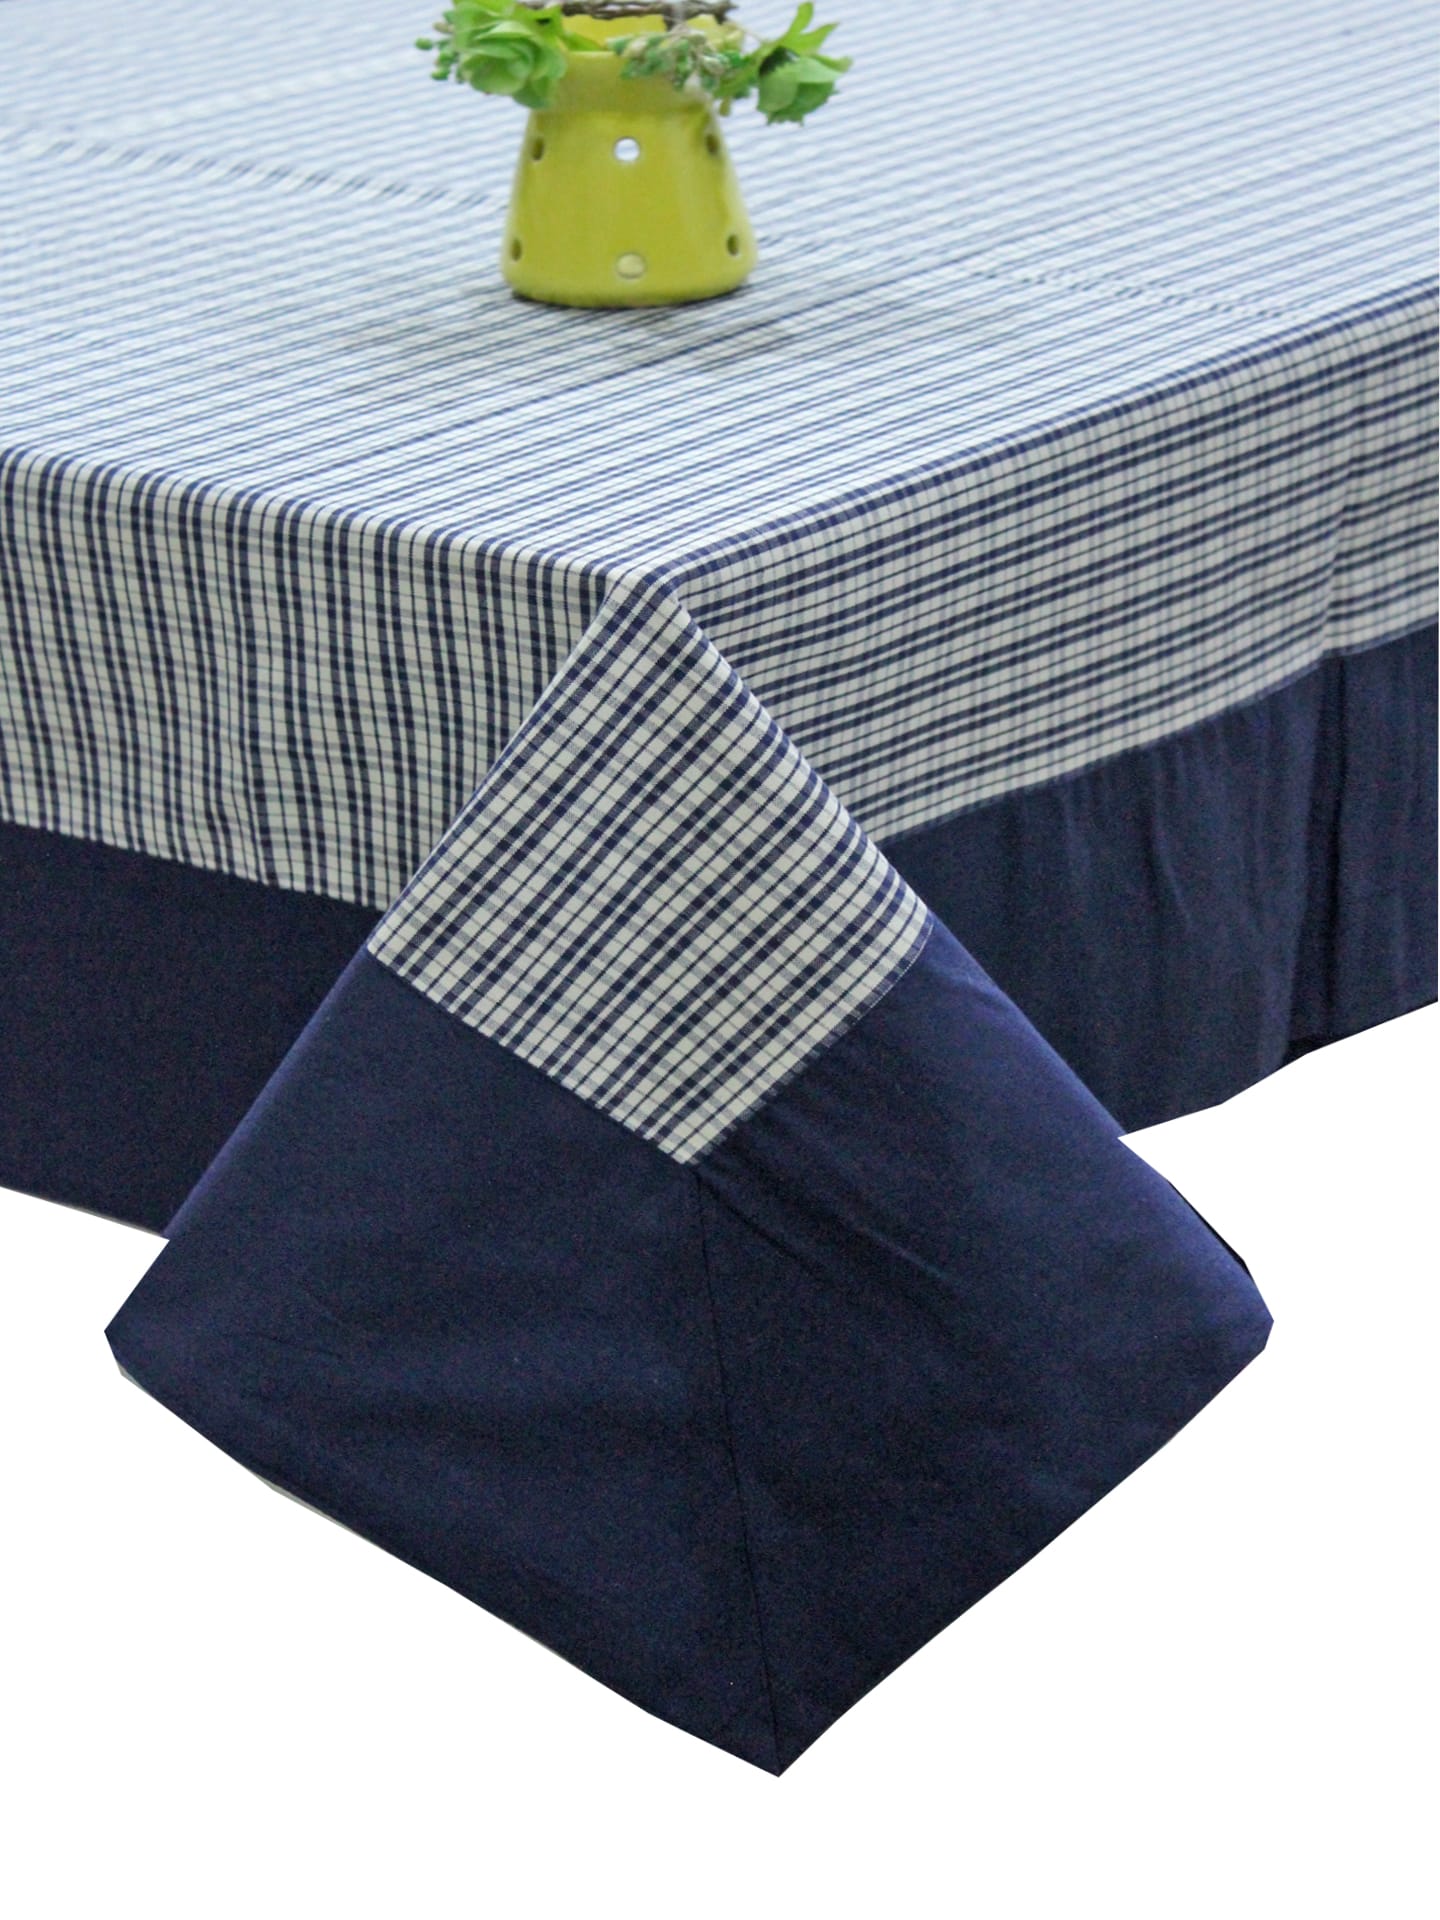 Alpha Blue Woven Cotton Check Table Cover(1 Pc) online in India